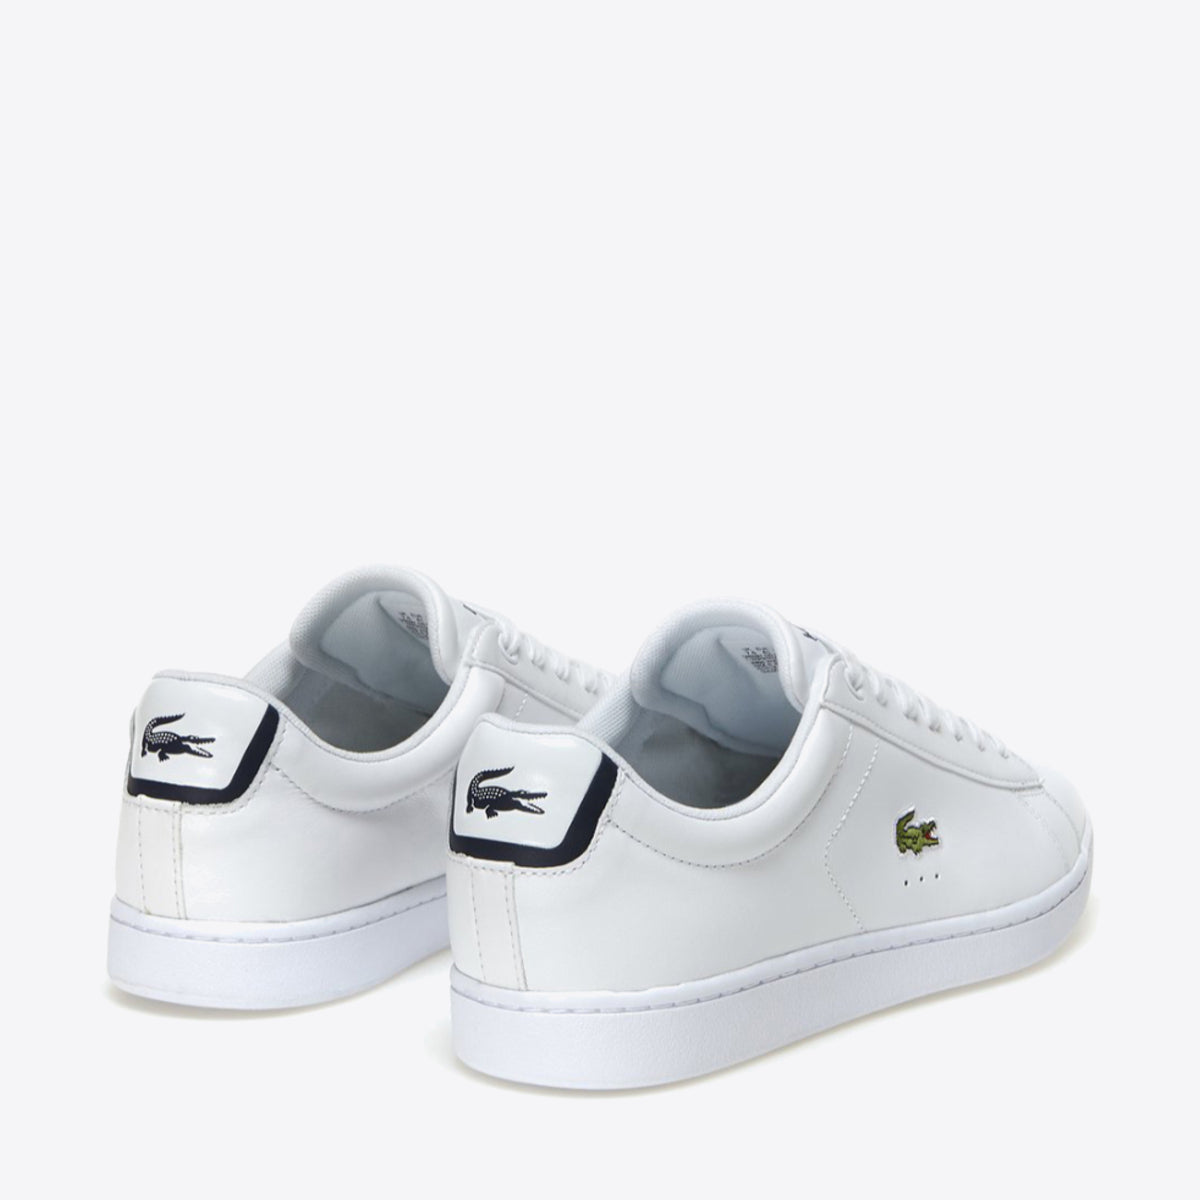 LACOSTE Carnaby Evo Trainer White - Image 7